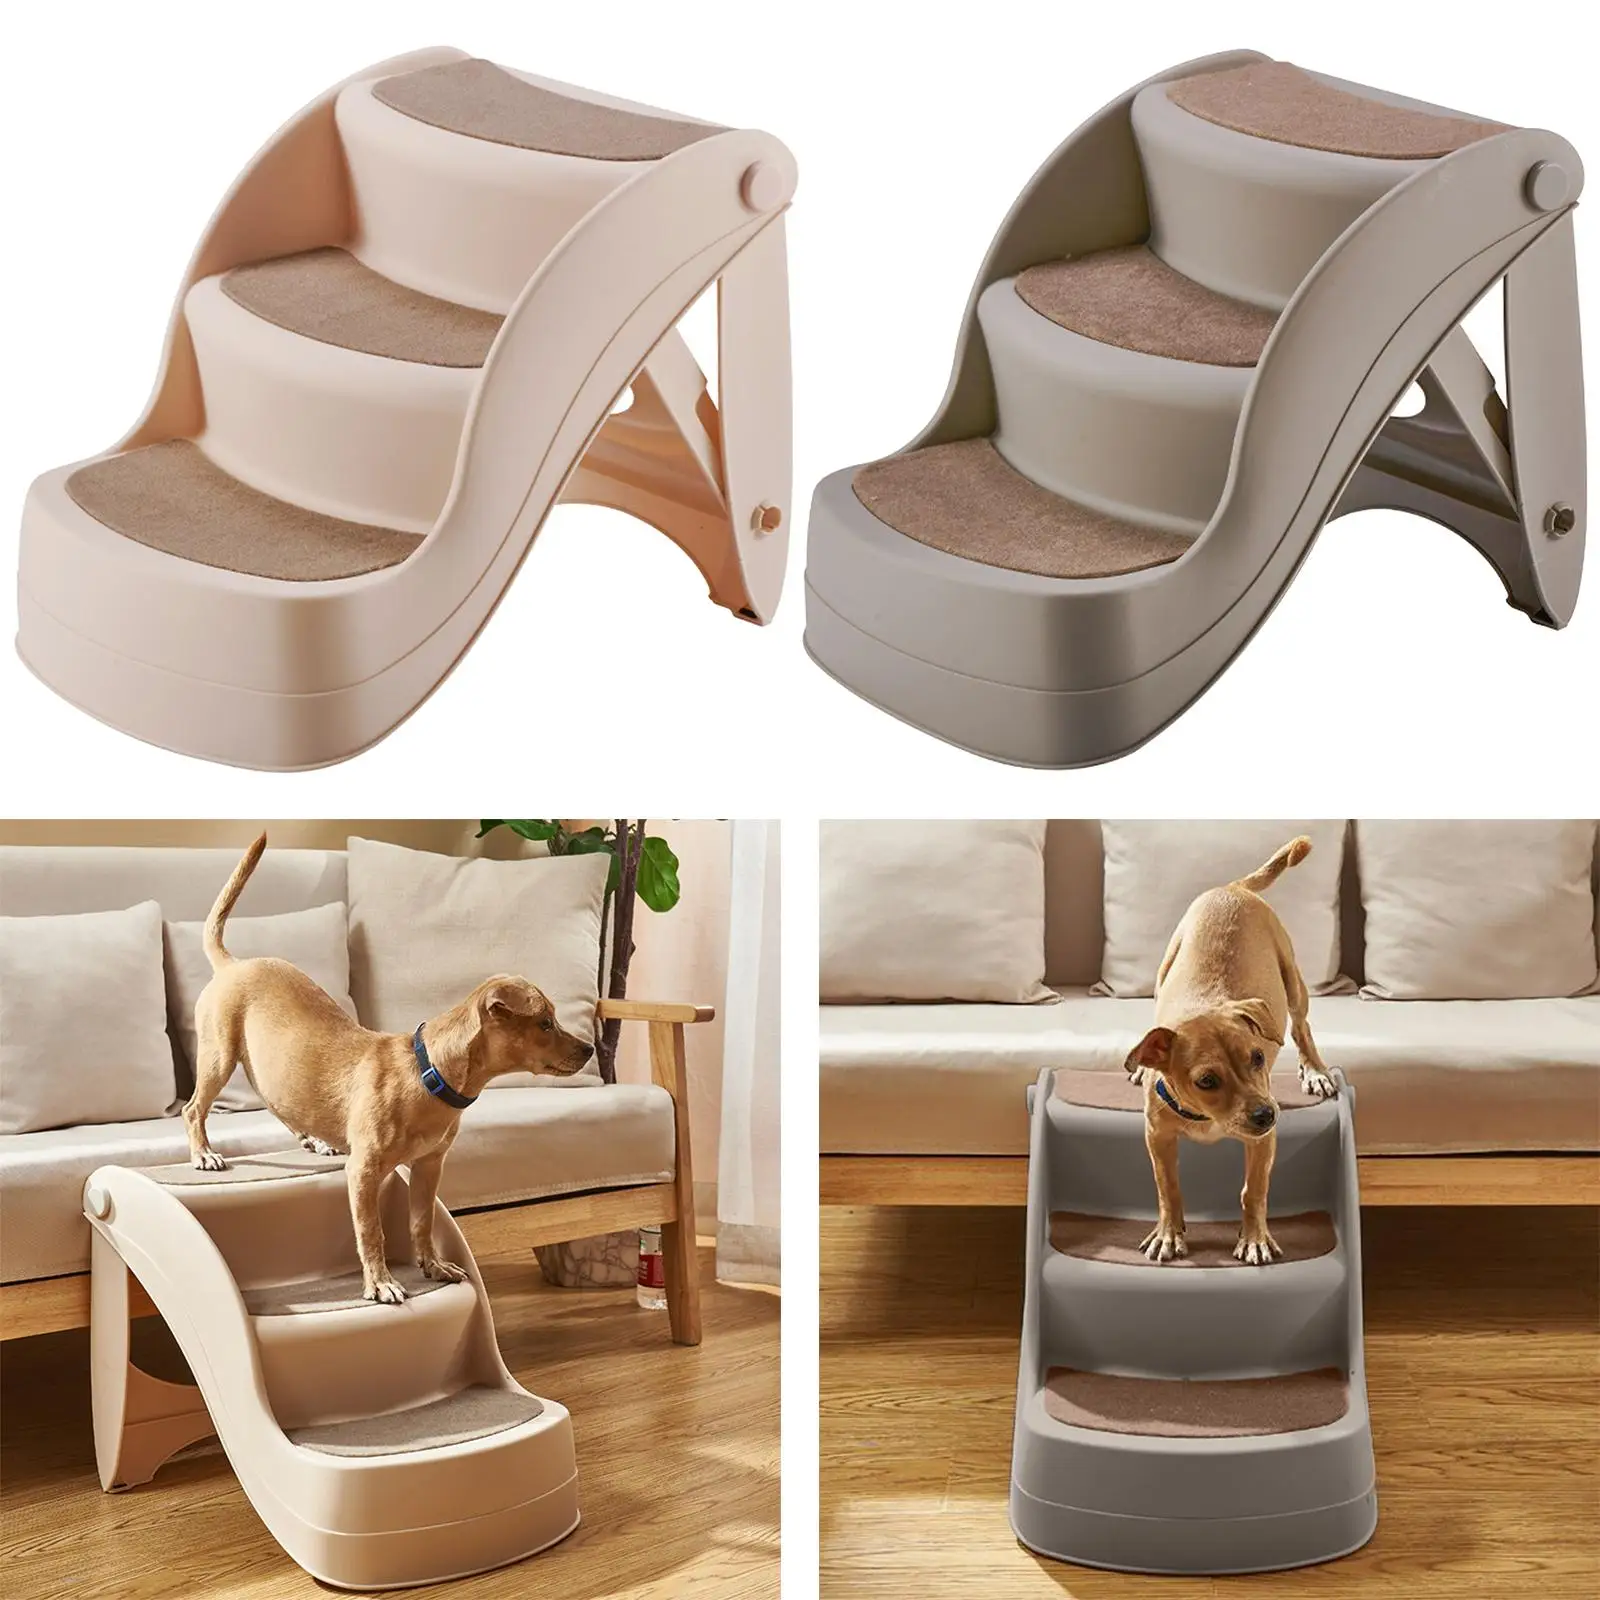 Folding Plastic Dog Pet Stairs Indoor/Outdoor ,Fit Easily in The Closet No Slipping for Home and Vehicle Safe Lightweight